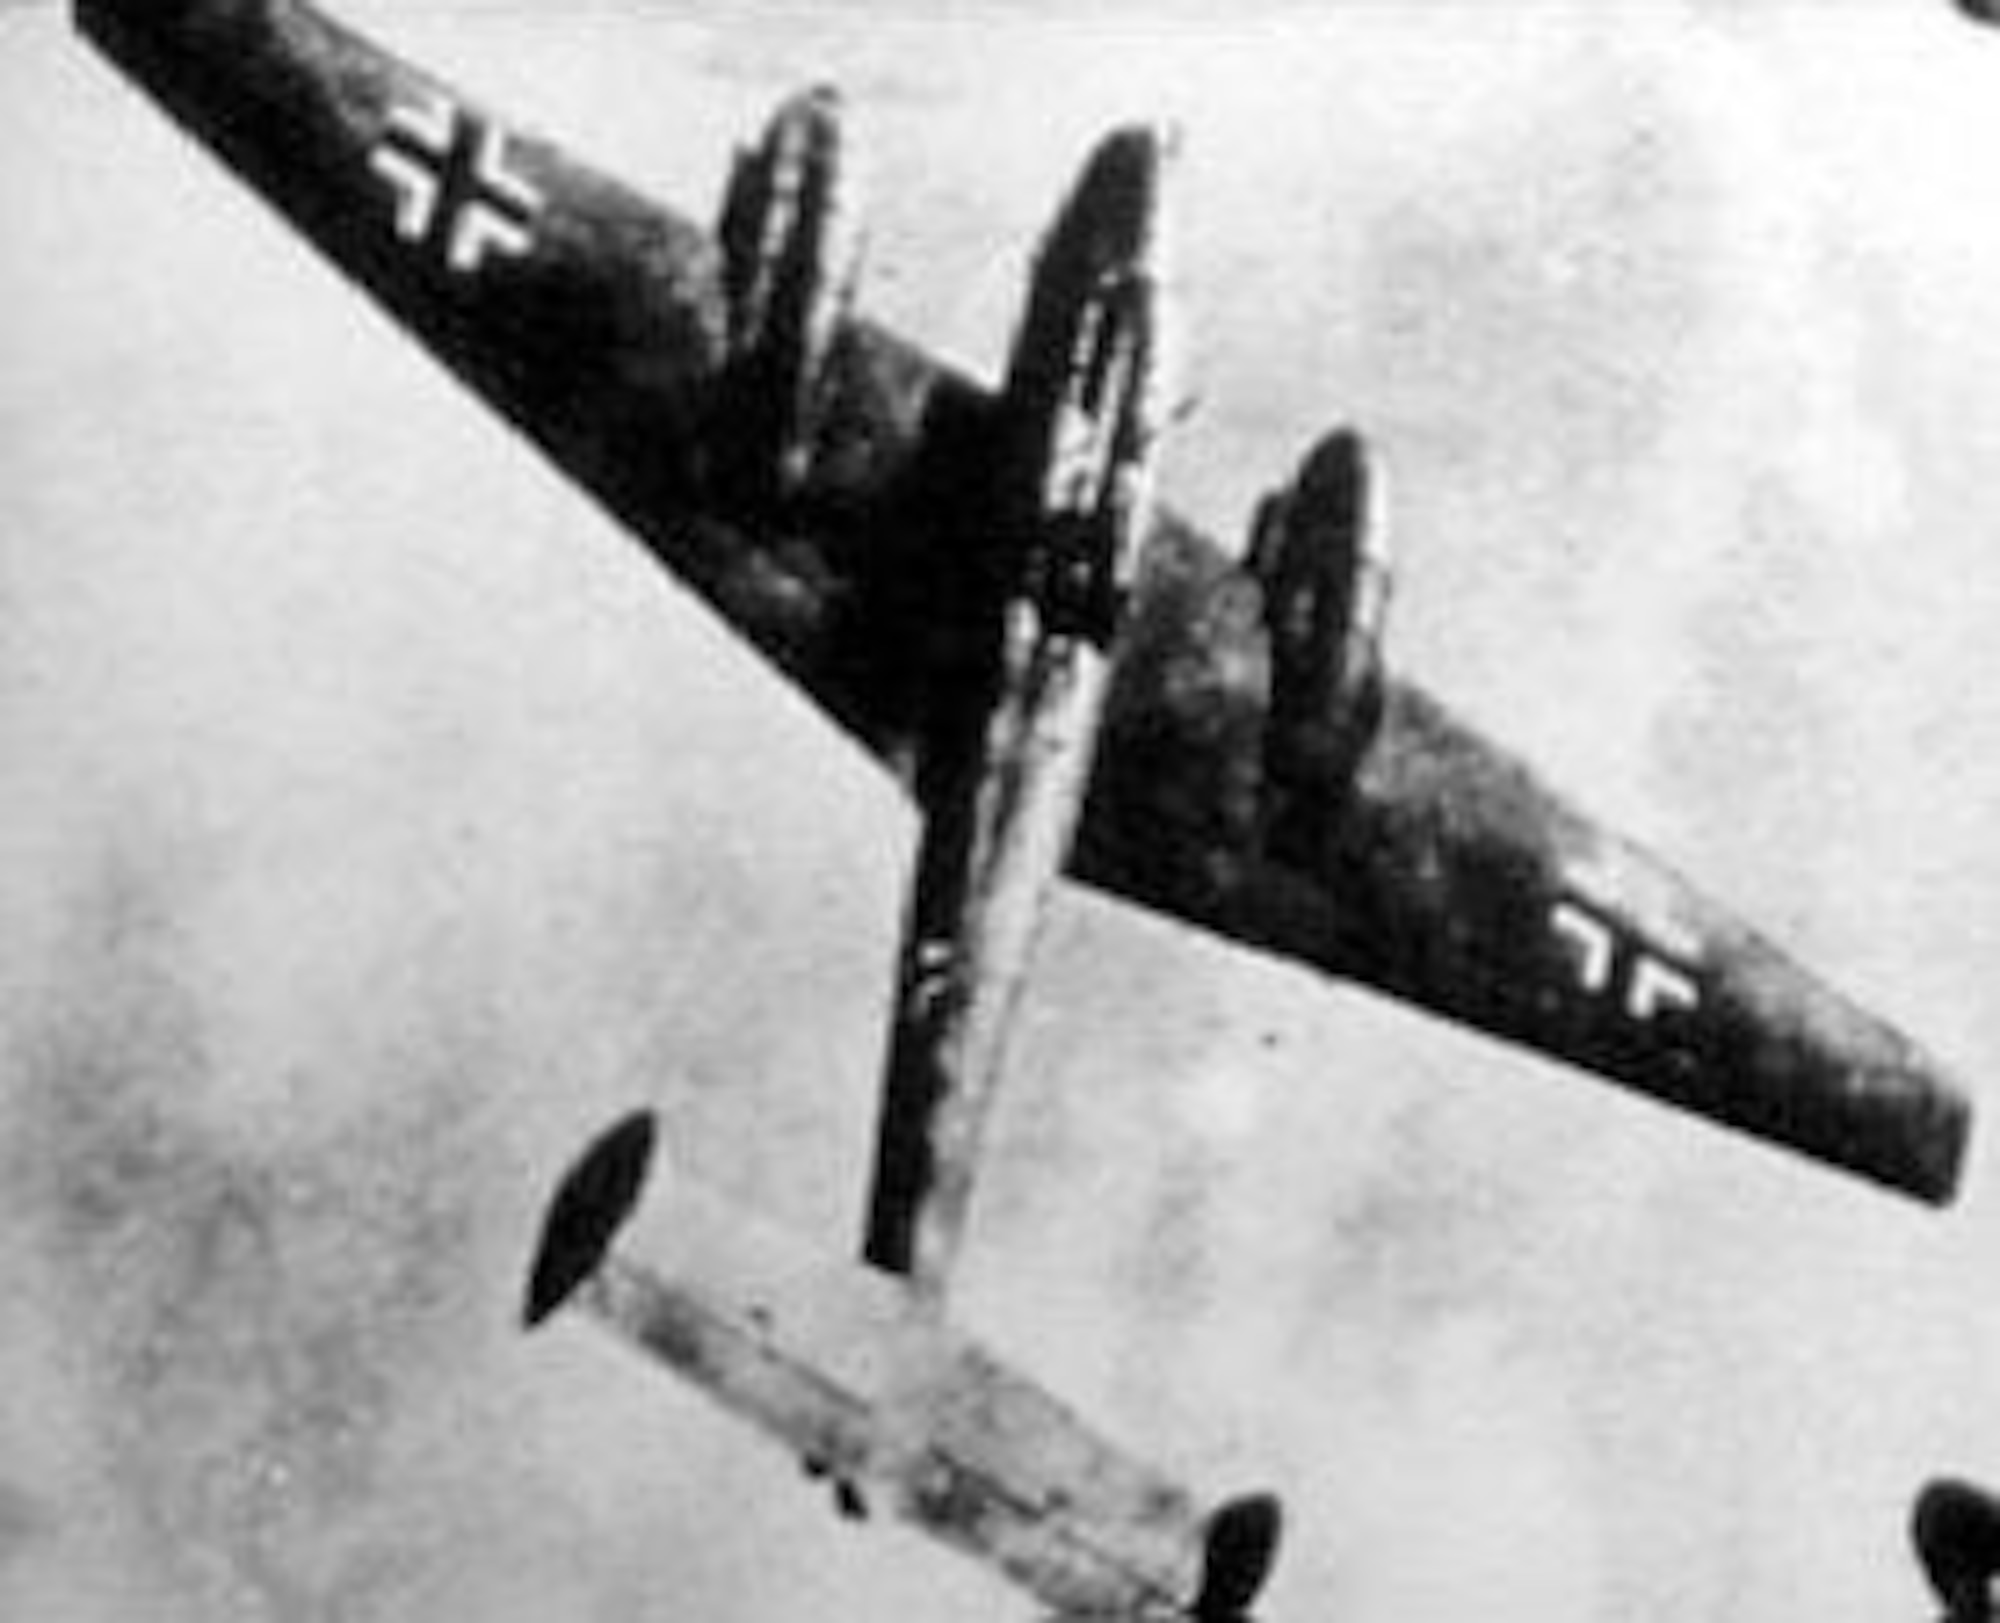 The Luftwaffe also relied upon twin-engine planes such as the Junkers Ju 88 and the Messerschmitt Me 110 (shown here), particularly when AAF bombers flew above the heavy clouds. U.S. Air Force photograph.